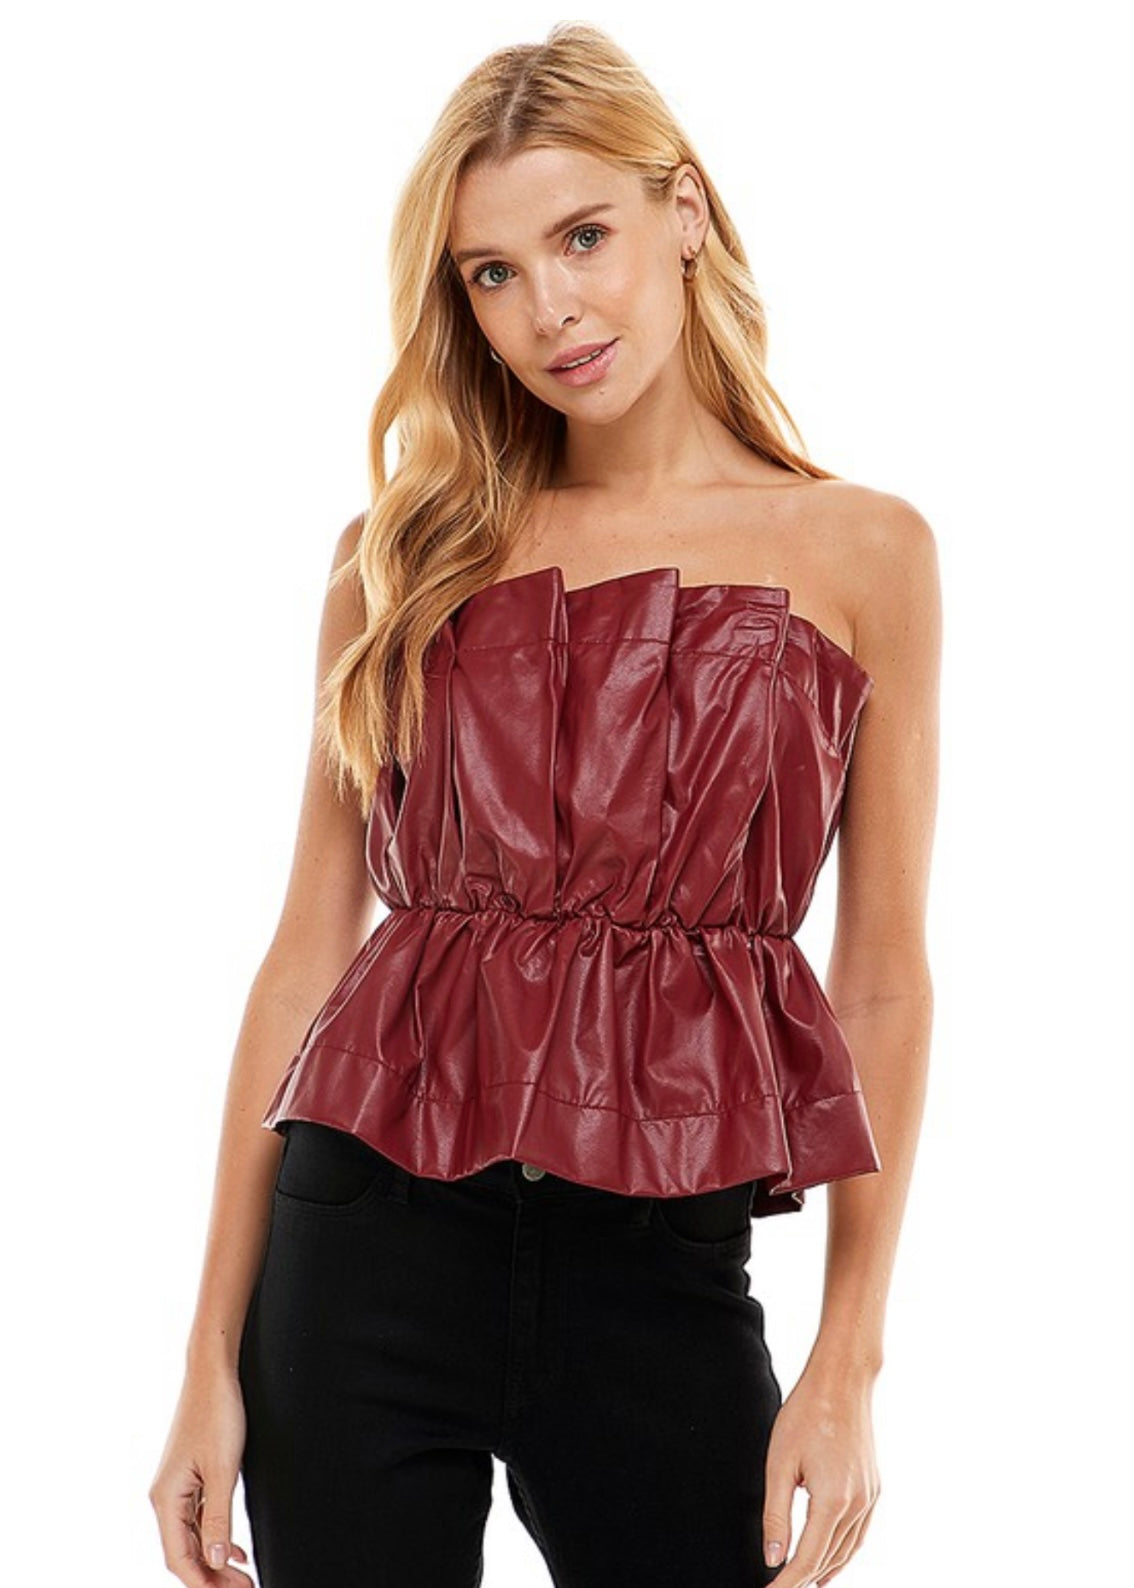 Falling In Love Strapless Burgundy Top